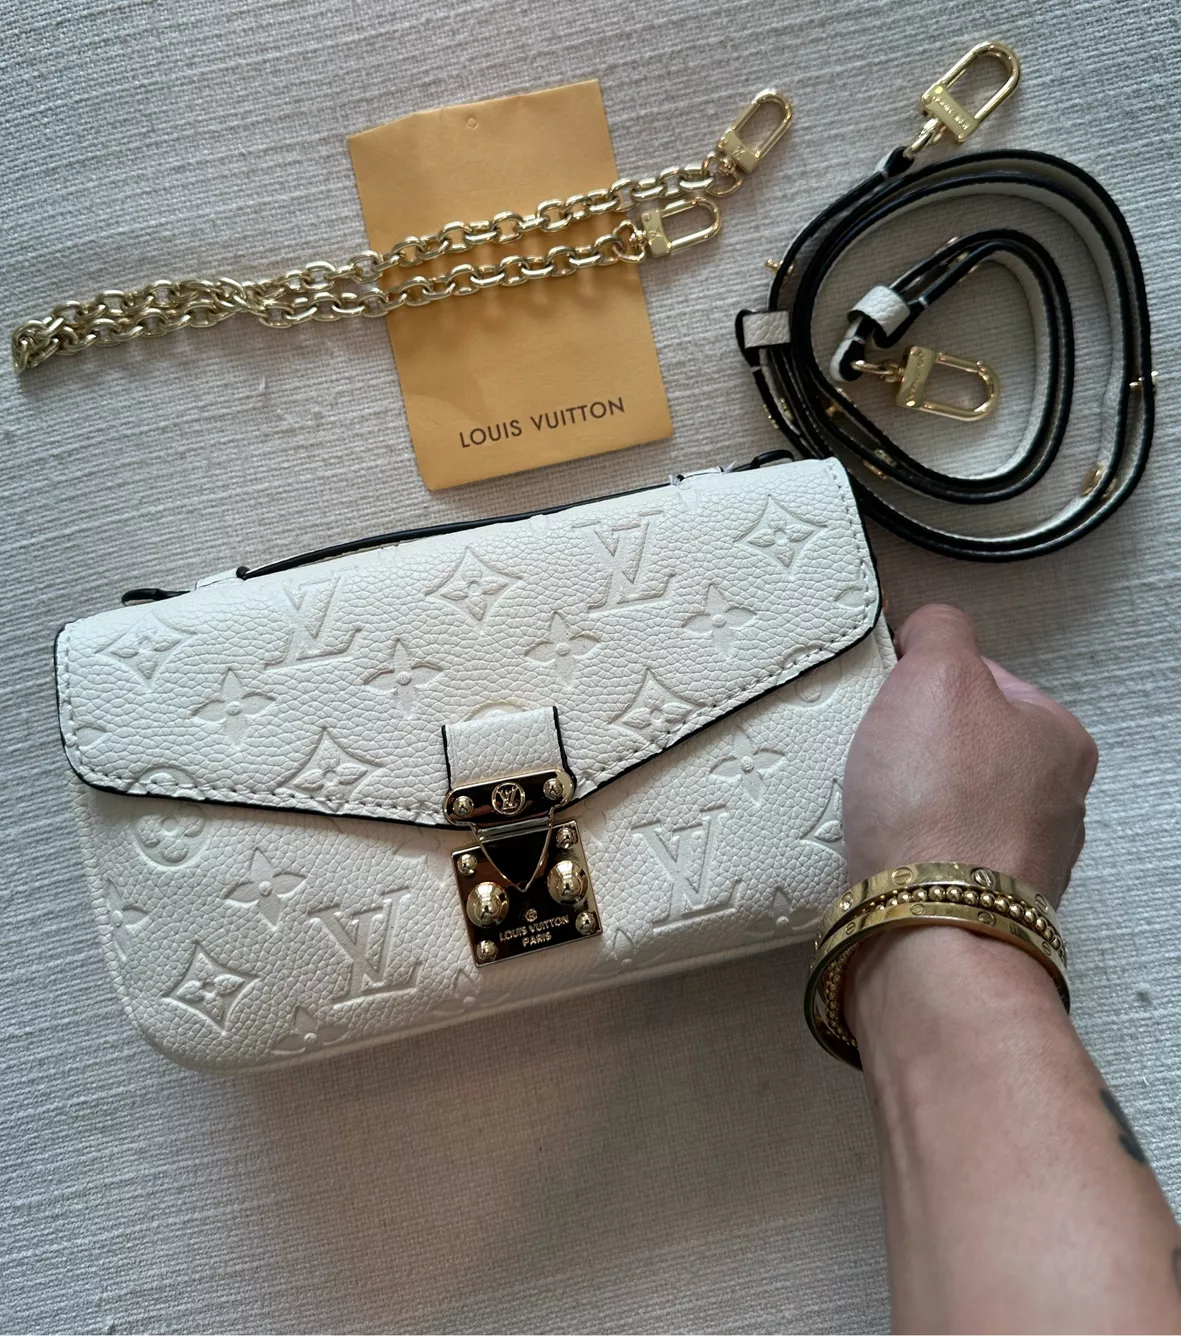 Louis Vuitton White New Lv High-Quality Handbags, For Office, 450 G